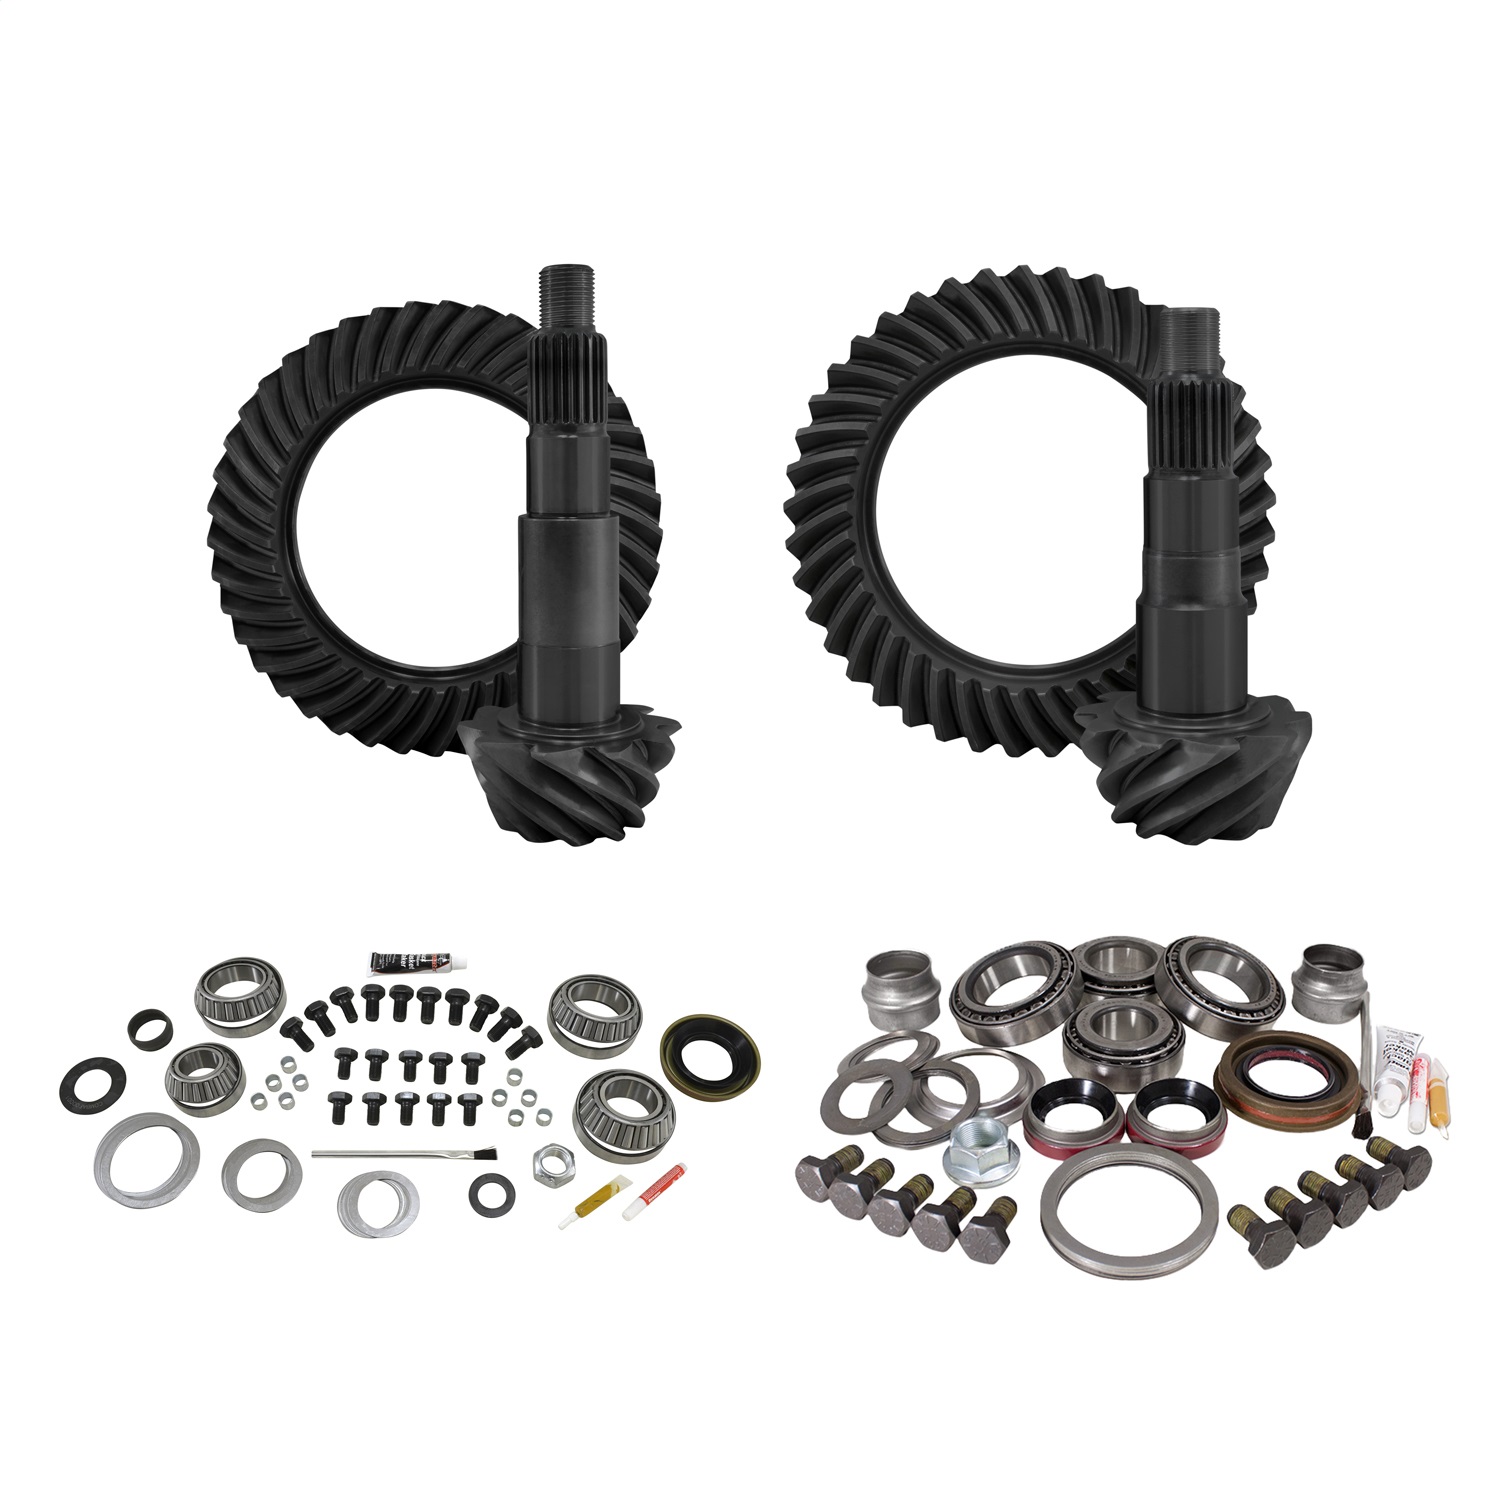 Yukon Gear & Axle YGK016 Ring And Pinion Gear And Install Kit Fits Wrangler (JK)